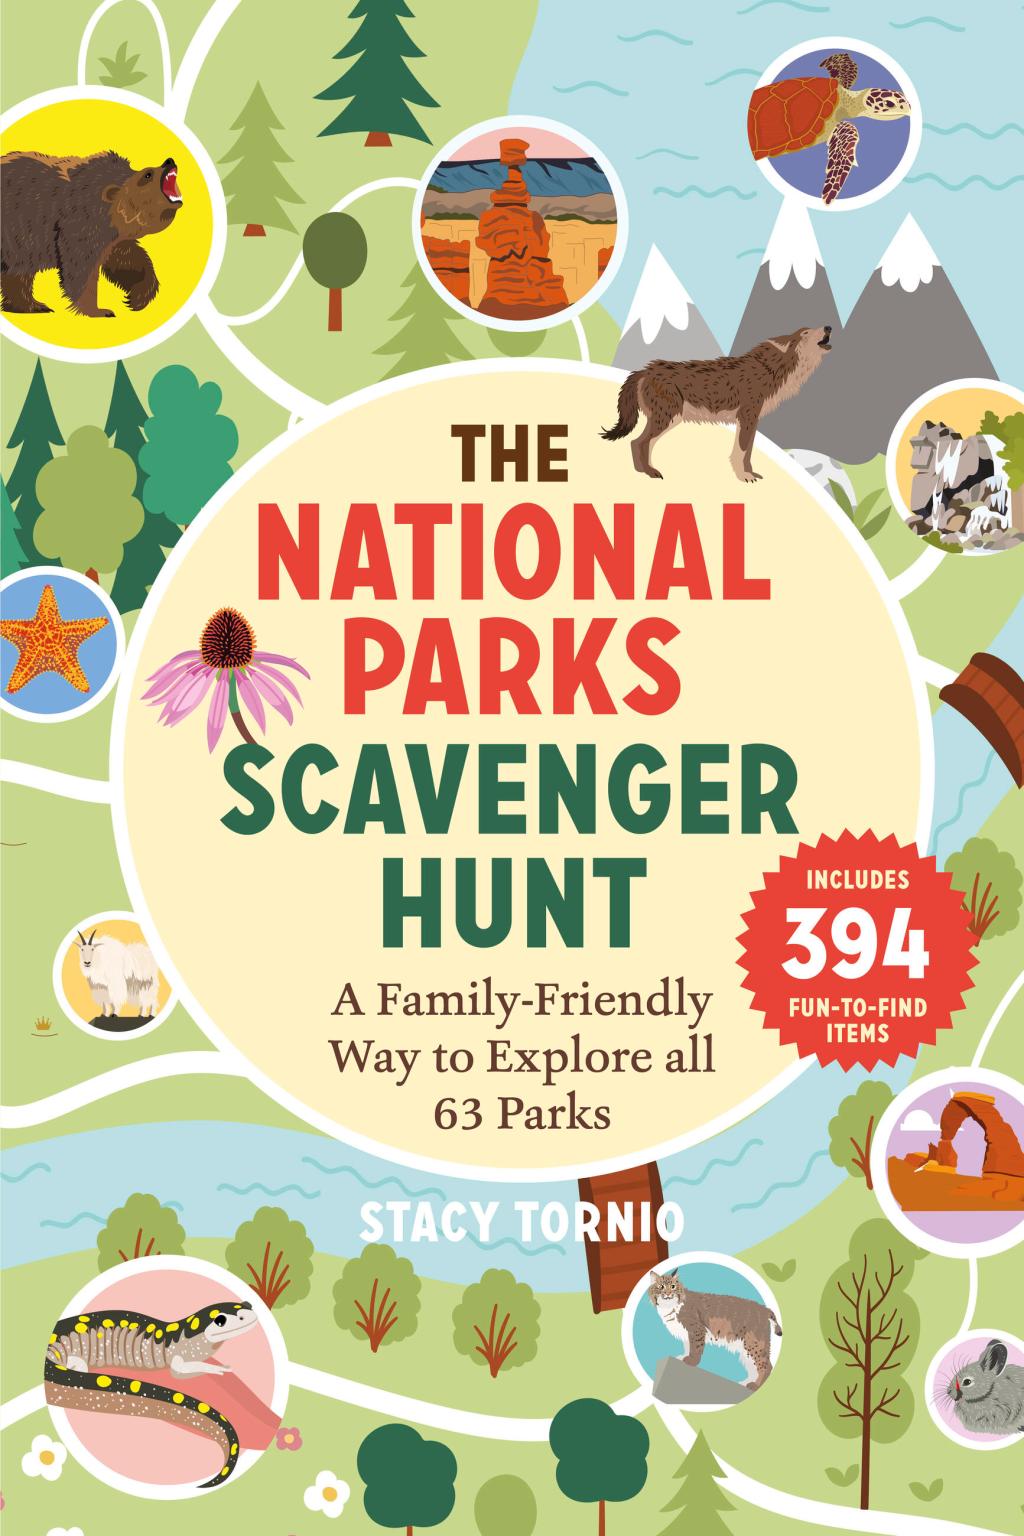 Book cover image of The National Parks Scavenger Hunt by Stacy Tornio.